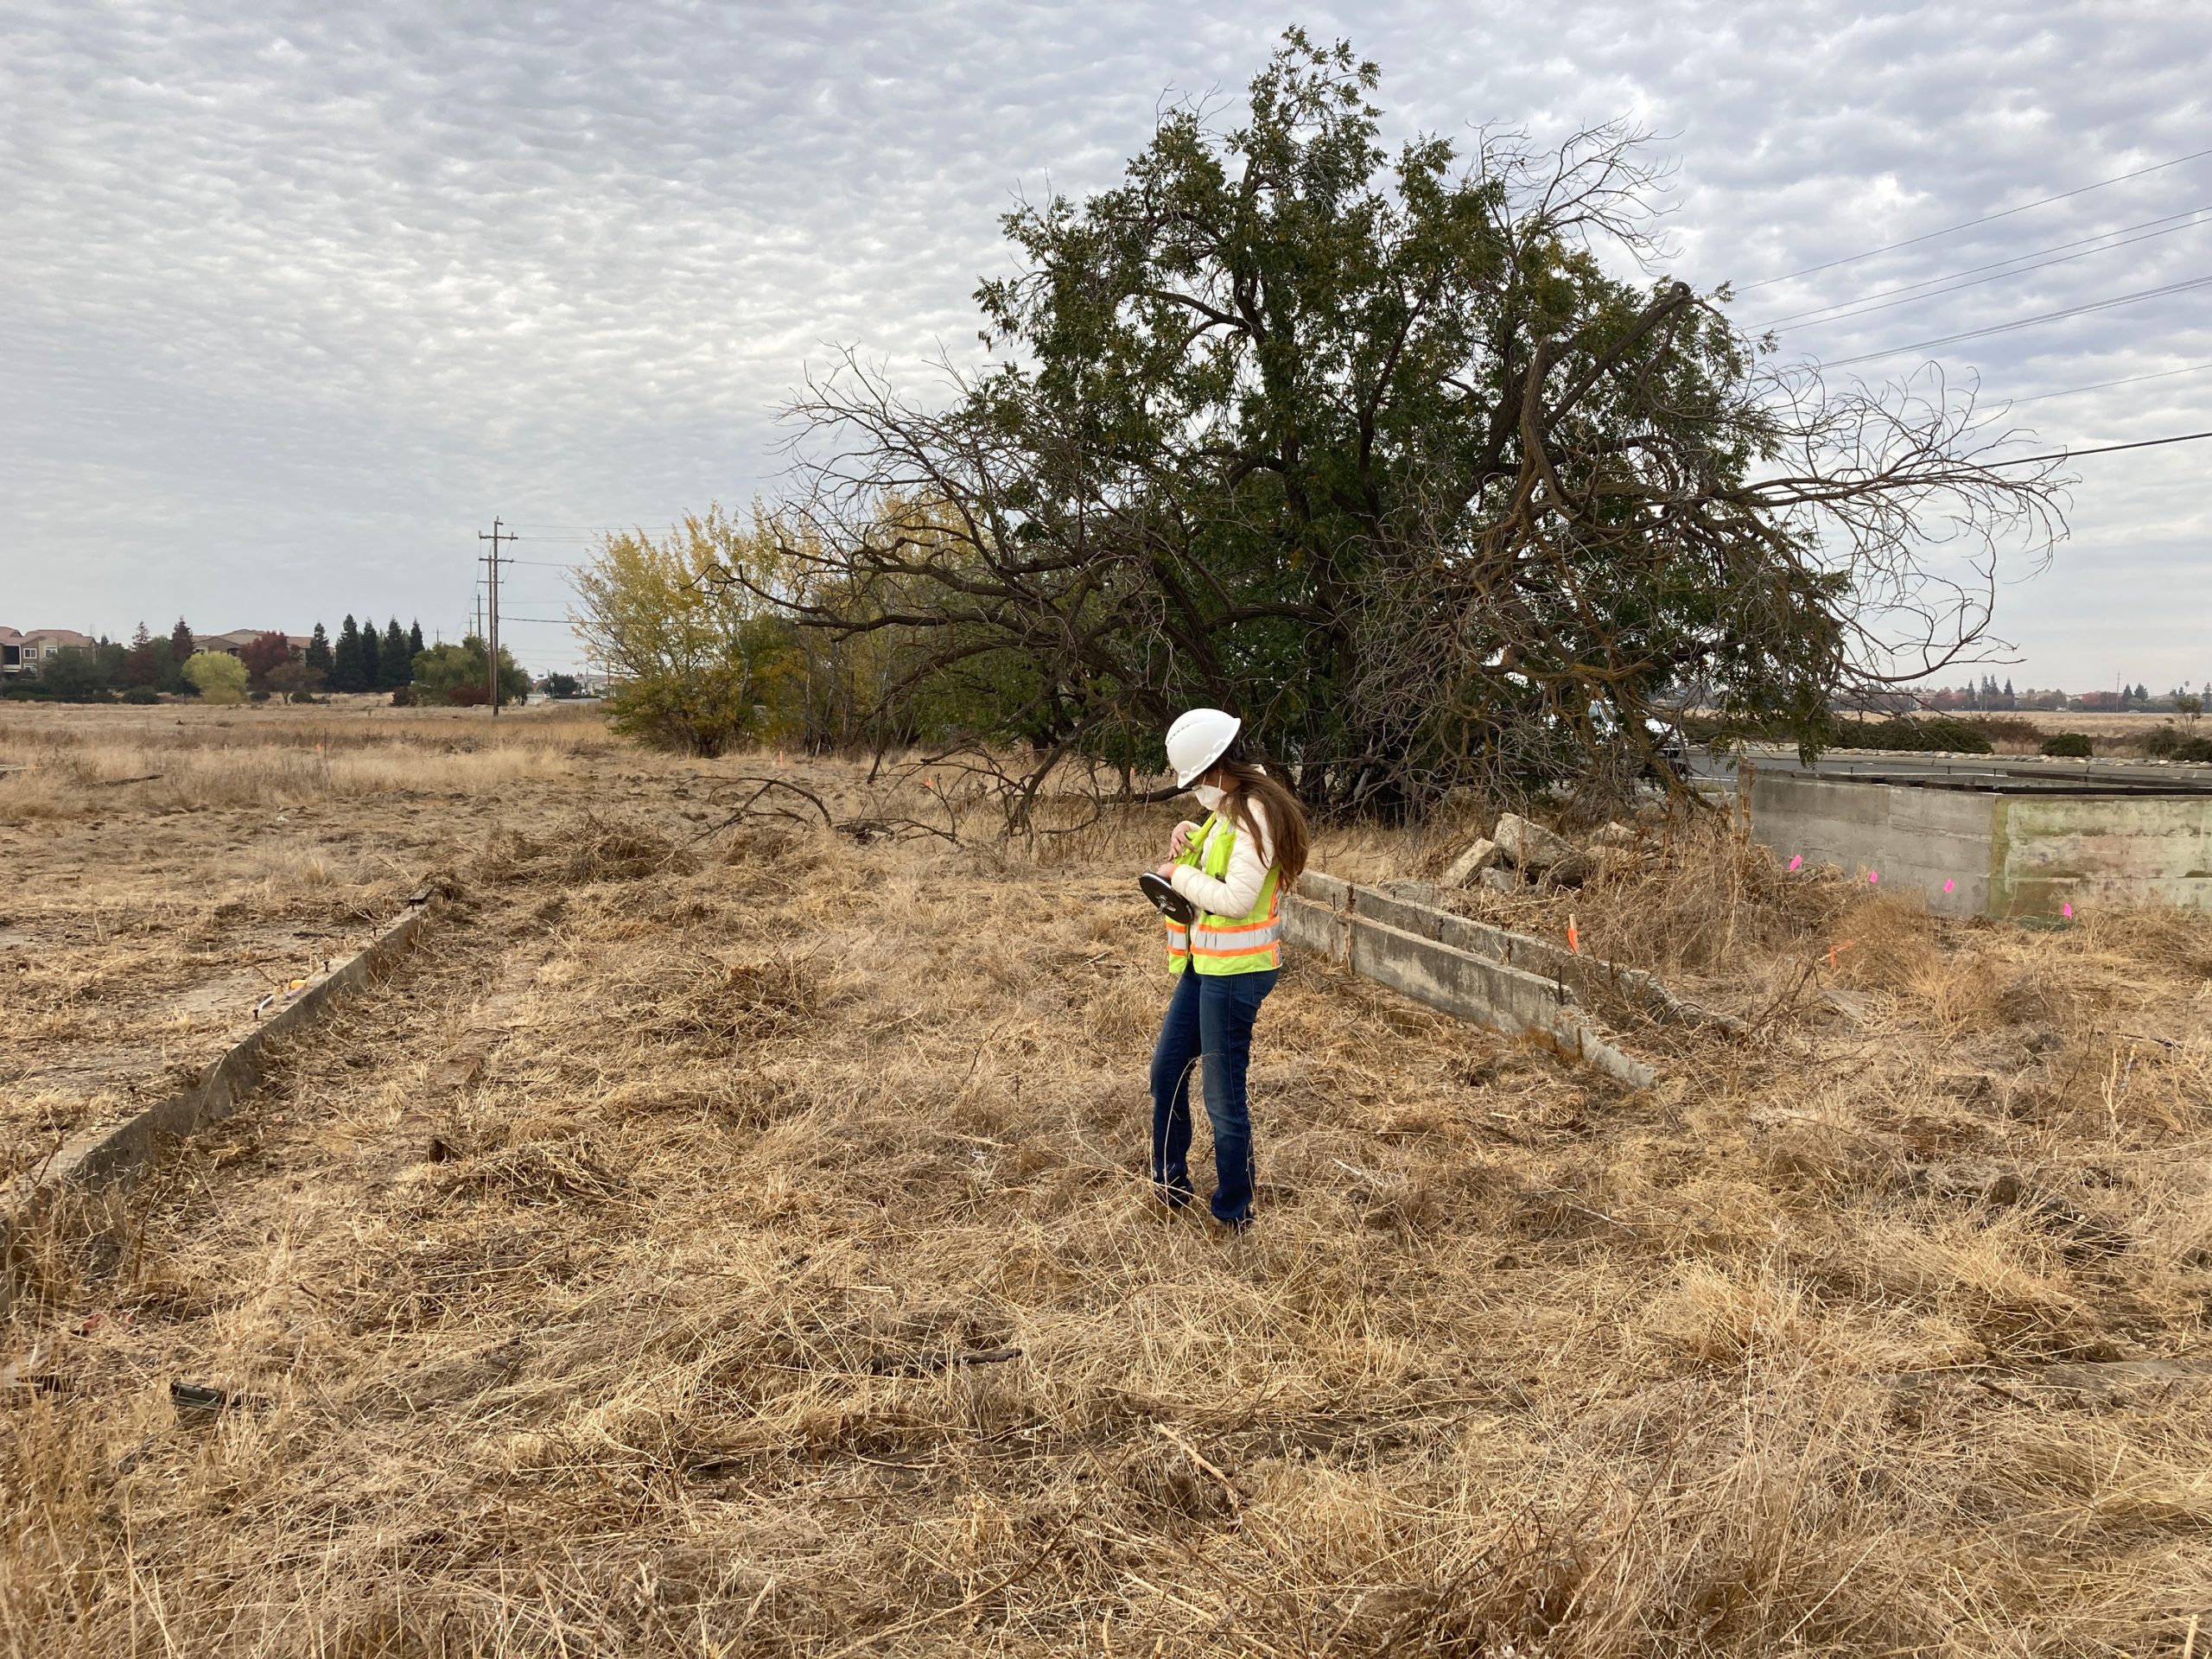 A Cogstone technician conducting survey work in an open patch of land.